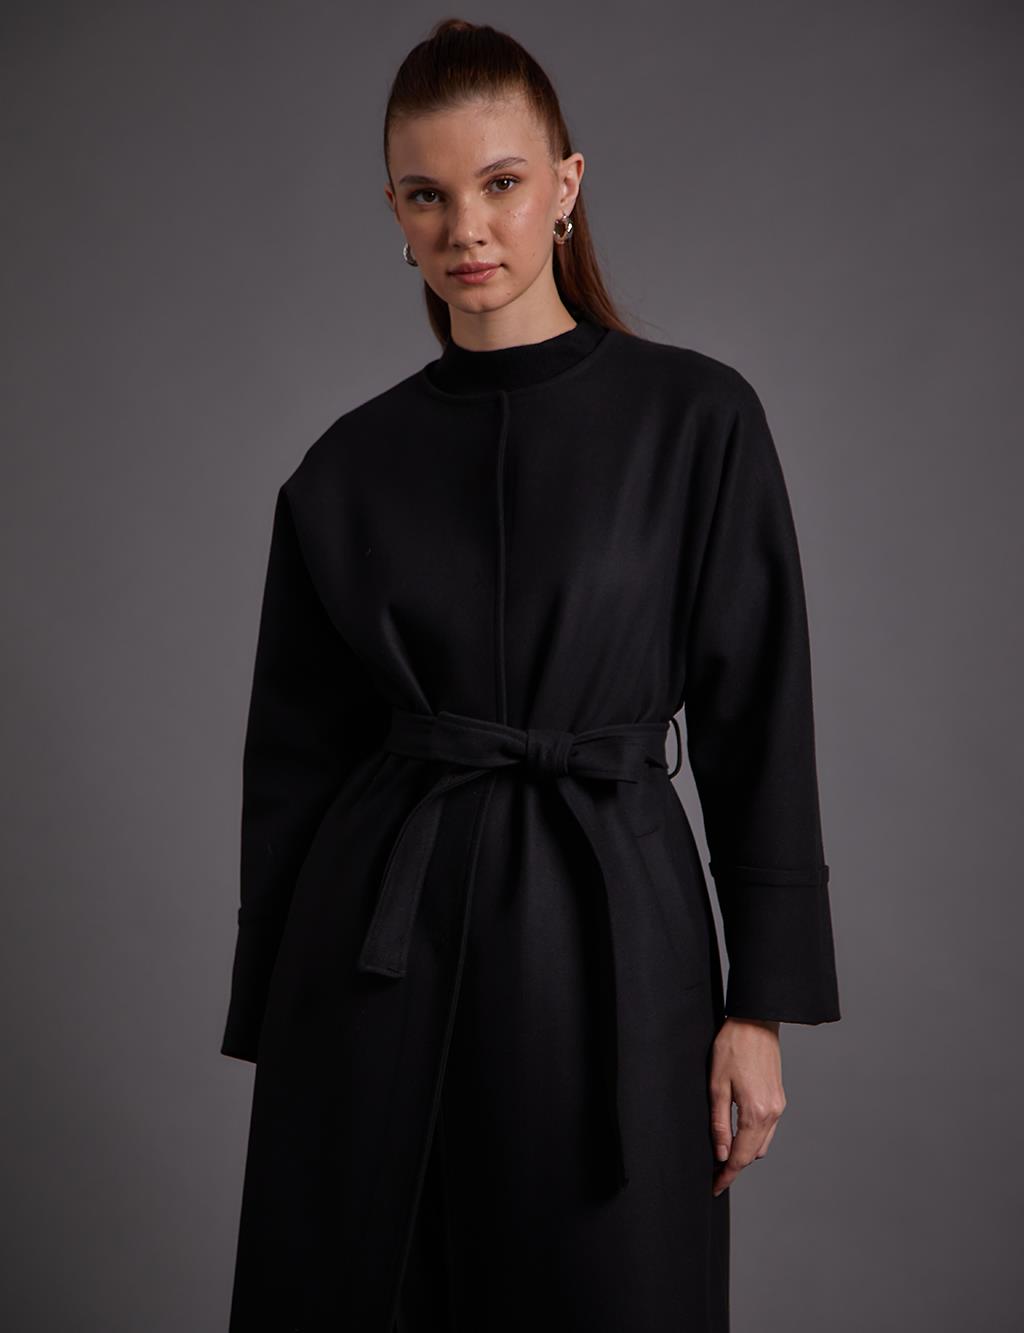 Japanese Sleeve Coat Black with Stone Embroidery on the Collar